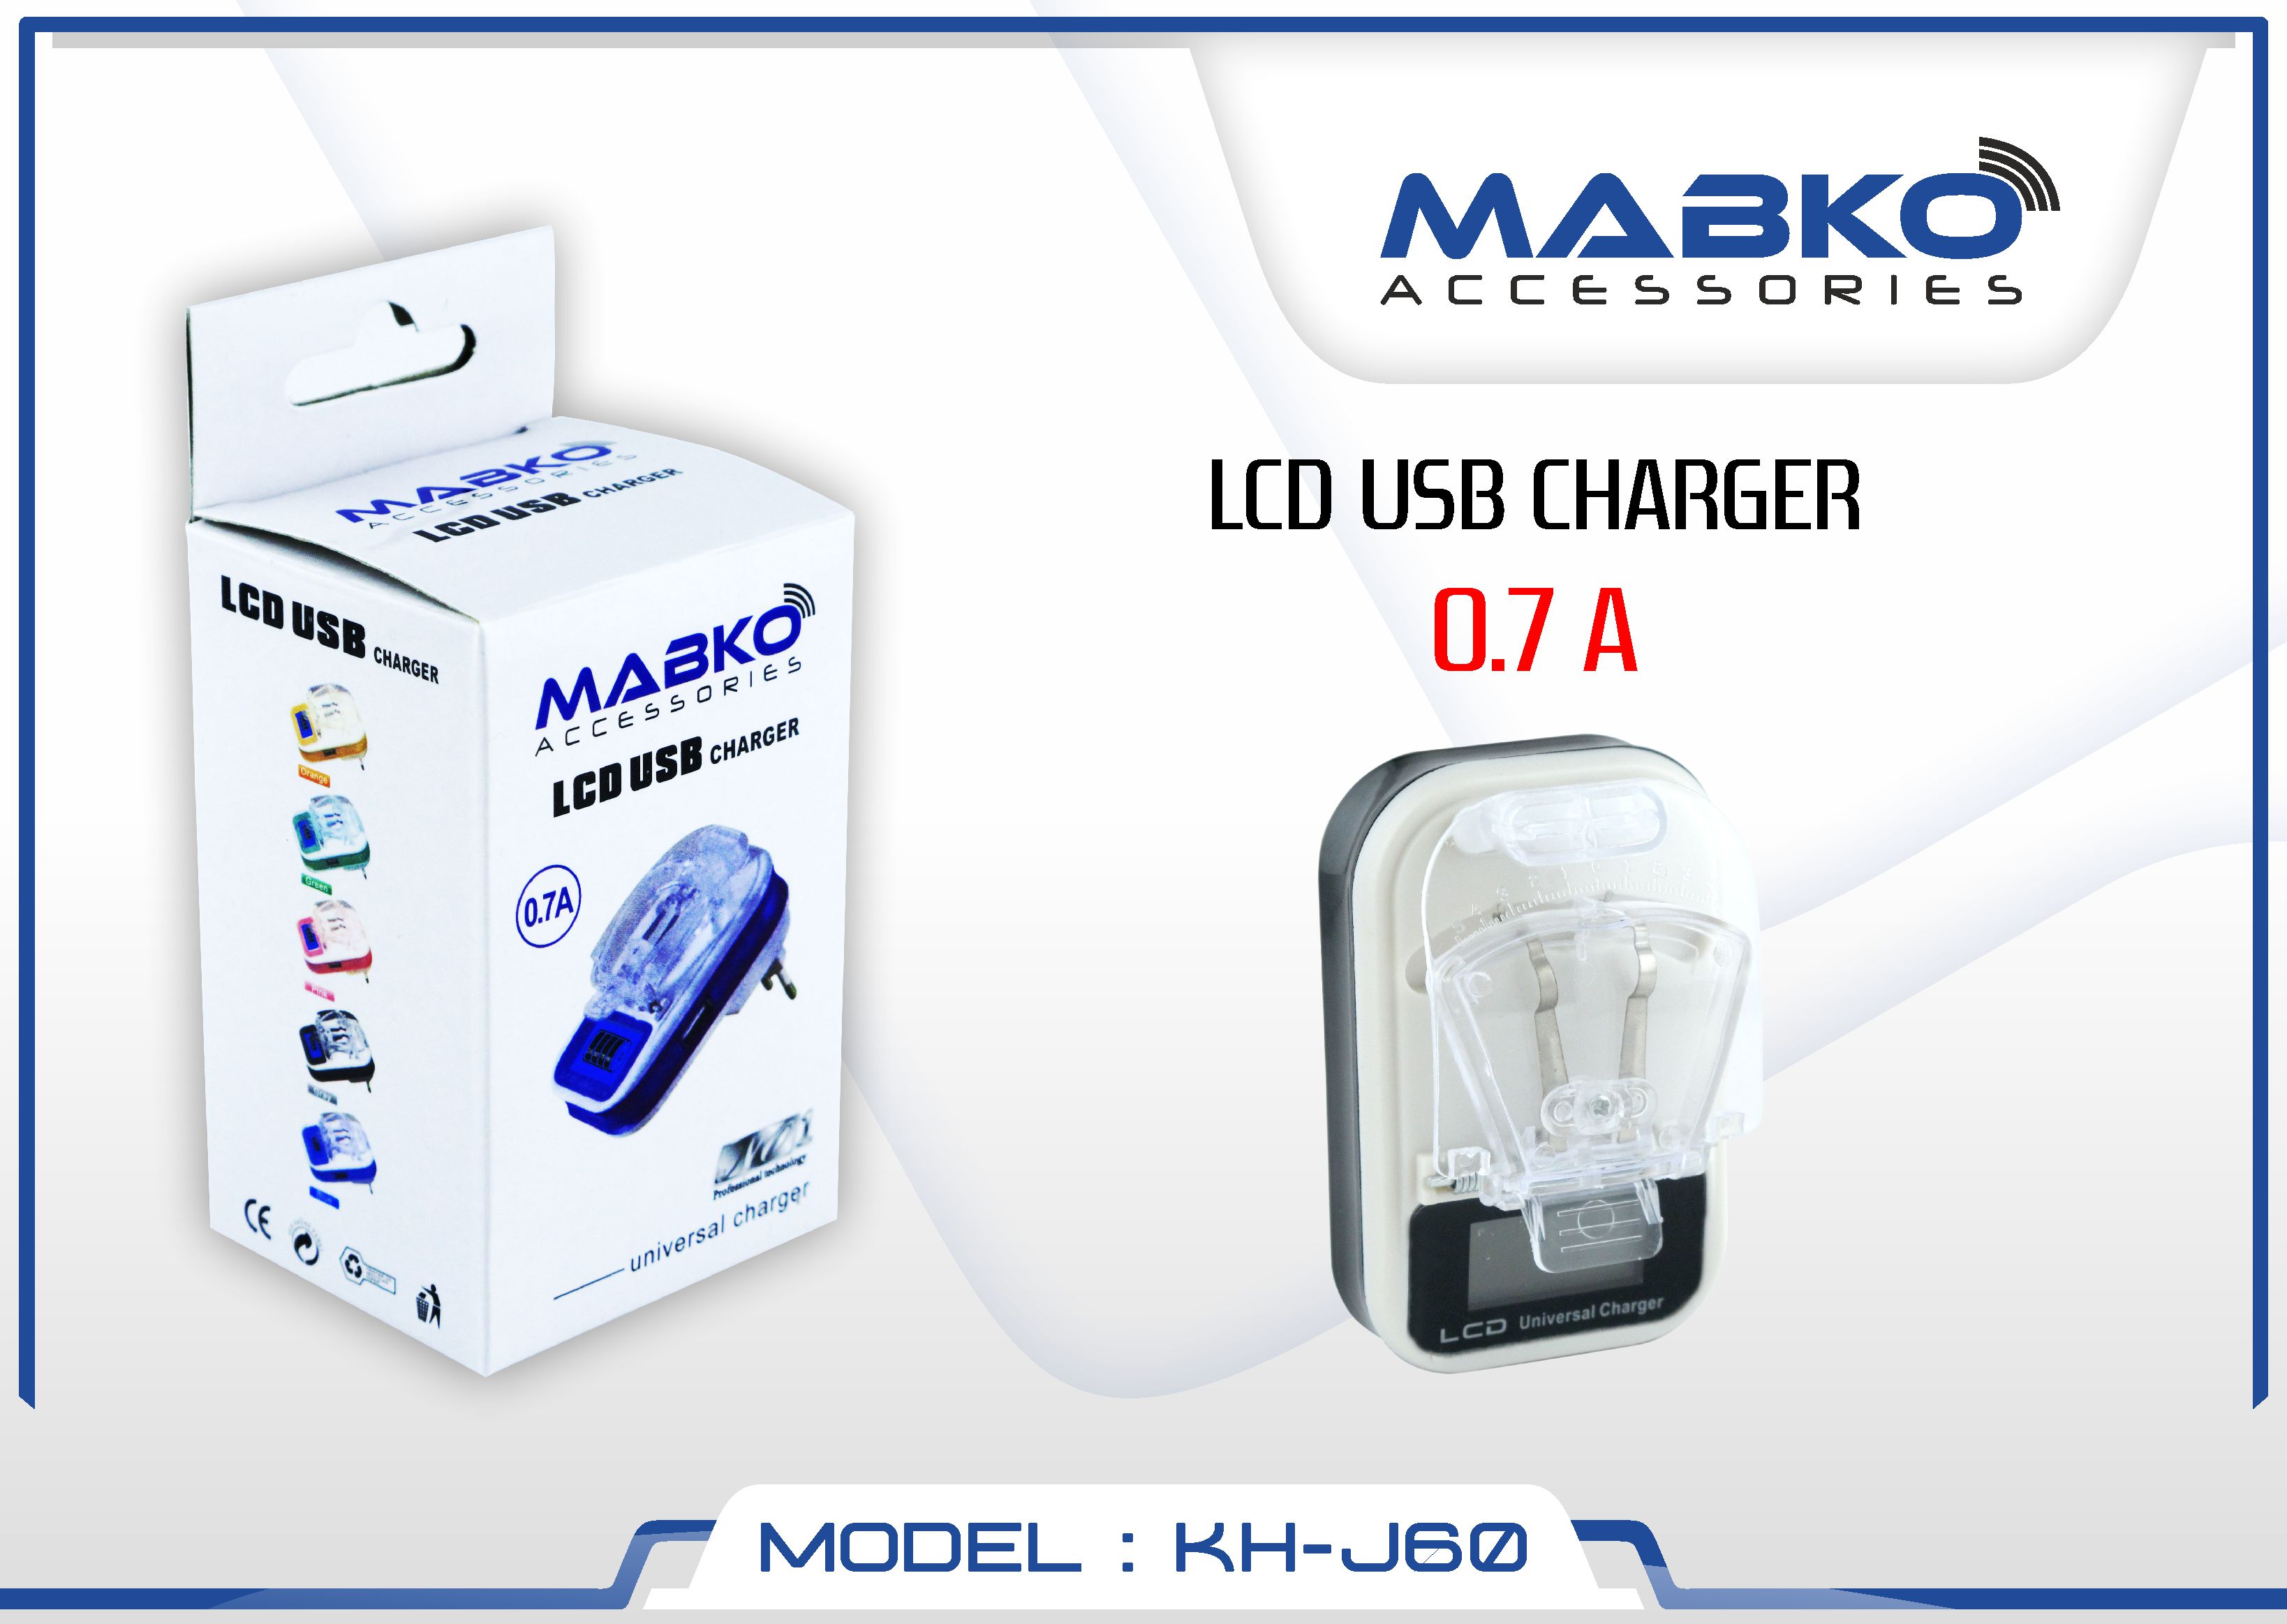 QUICK CHARGER 2 A